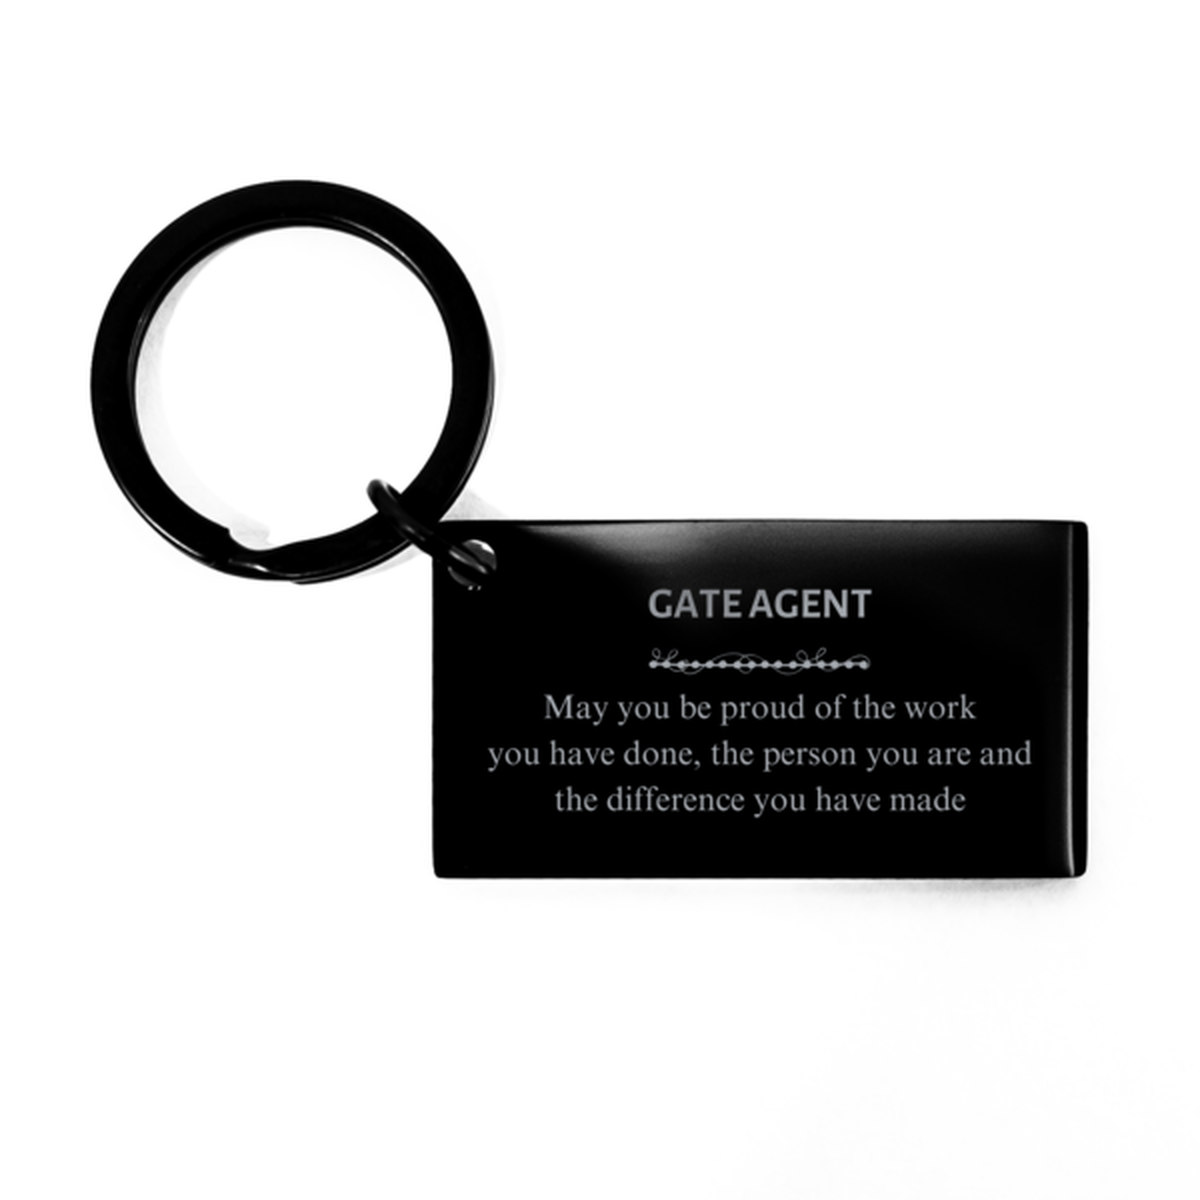 Mail Carrier May you be proud of the work you have done, Retirement Gate Agent Keychain for Colleague Appreciation Gifts Amazing for Gate Agent